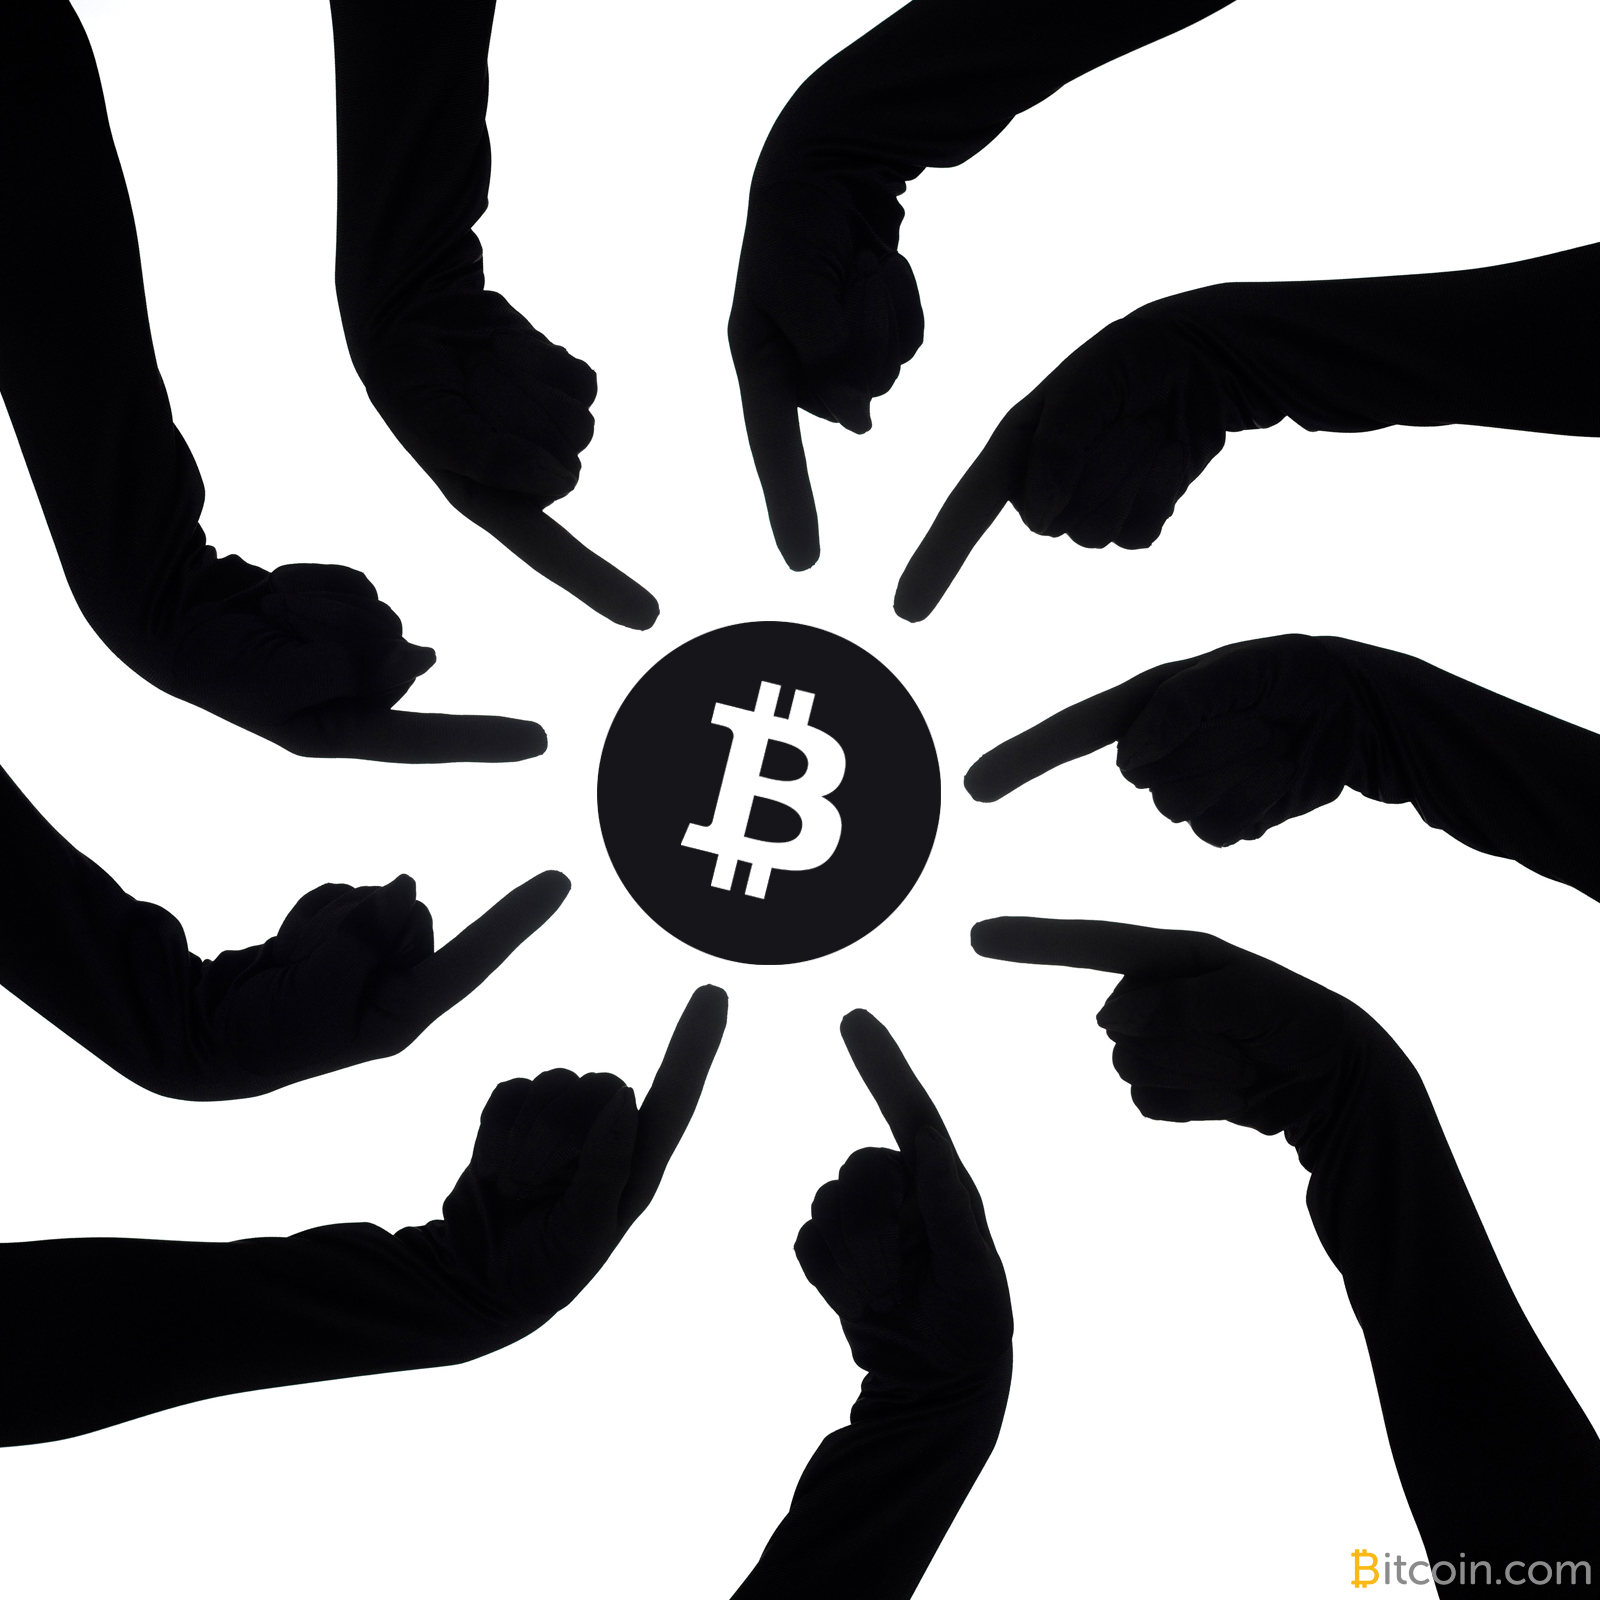 Wendy McElroy: How Centralized Exchanges Intend to Devastate You